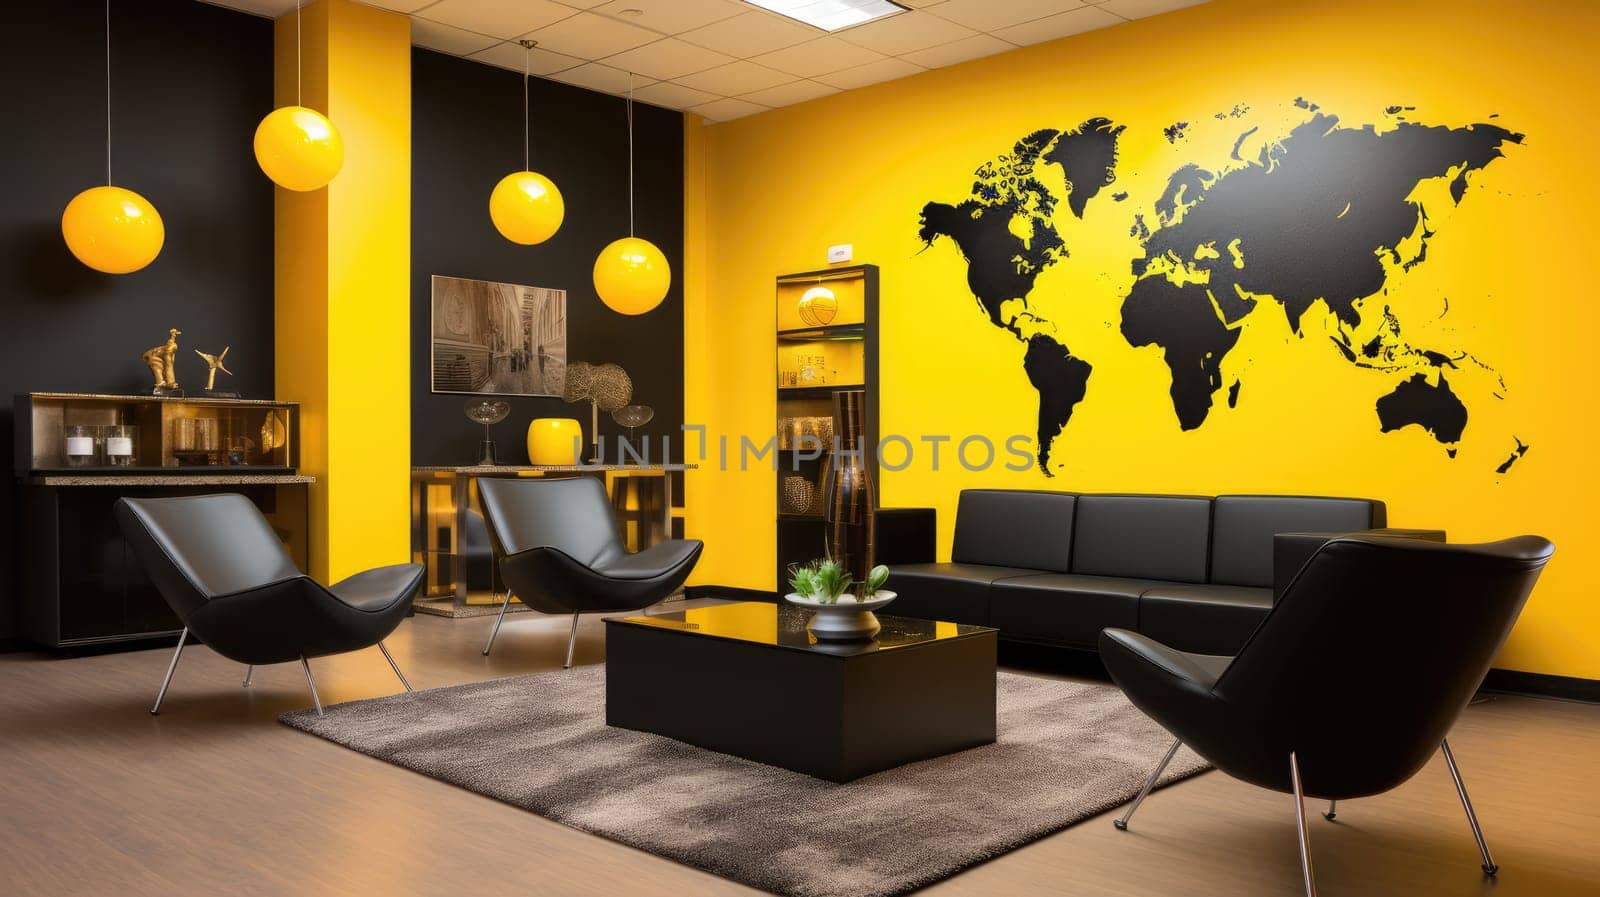 Travel agency office in yellow and black colors. World map on the wall. by natali_brill